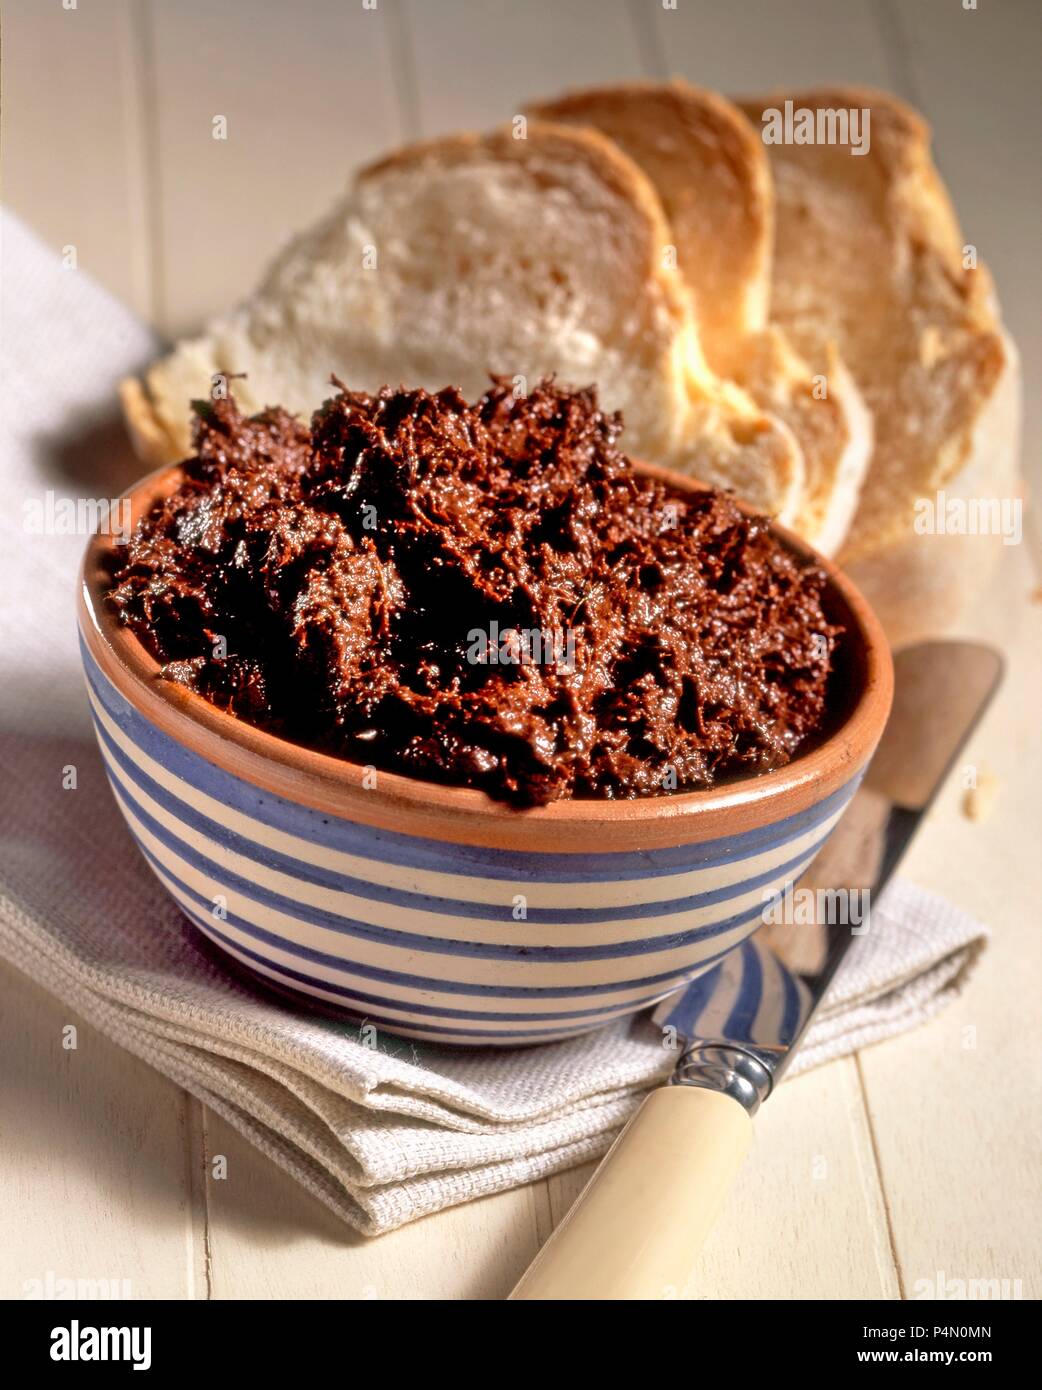 Caviale di Crucoli (anchovy paste with chilli and fennel seeds, Italy) Stock Photo